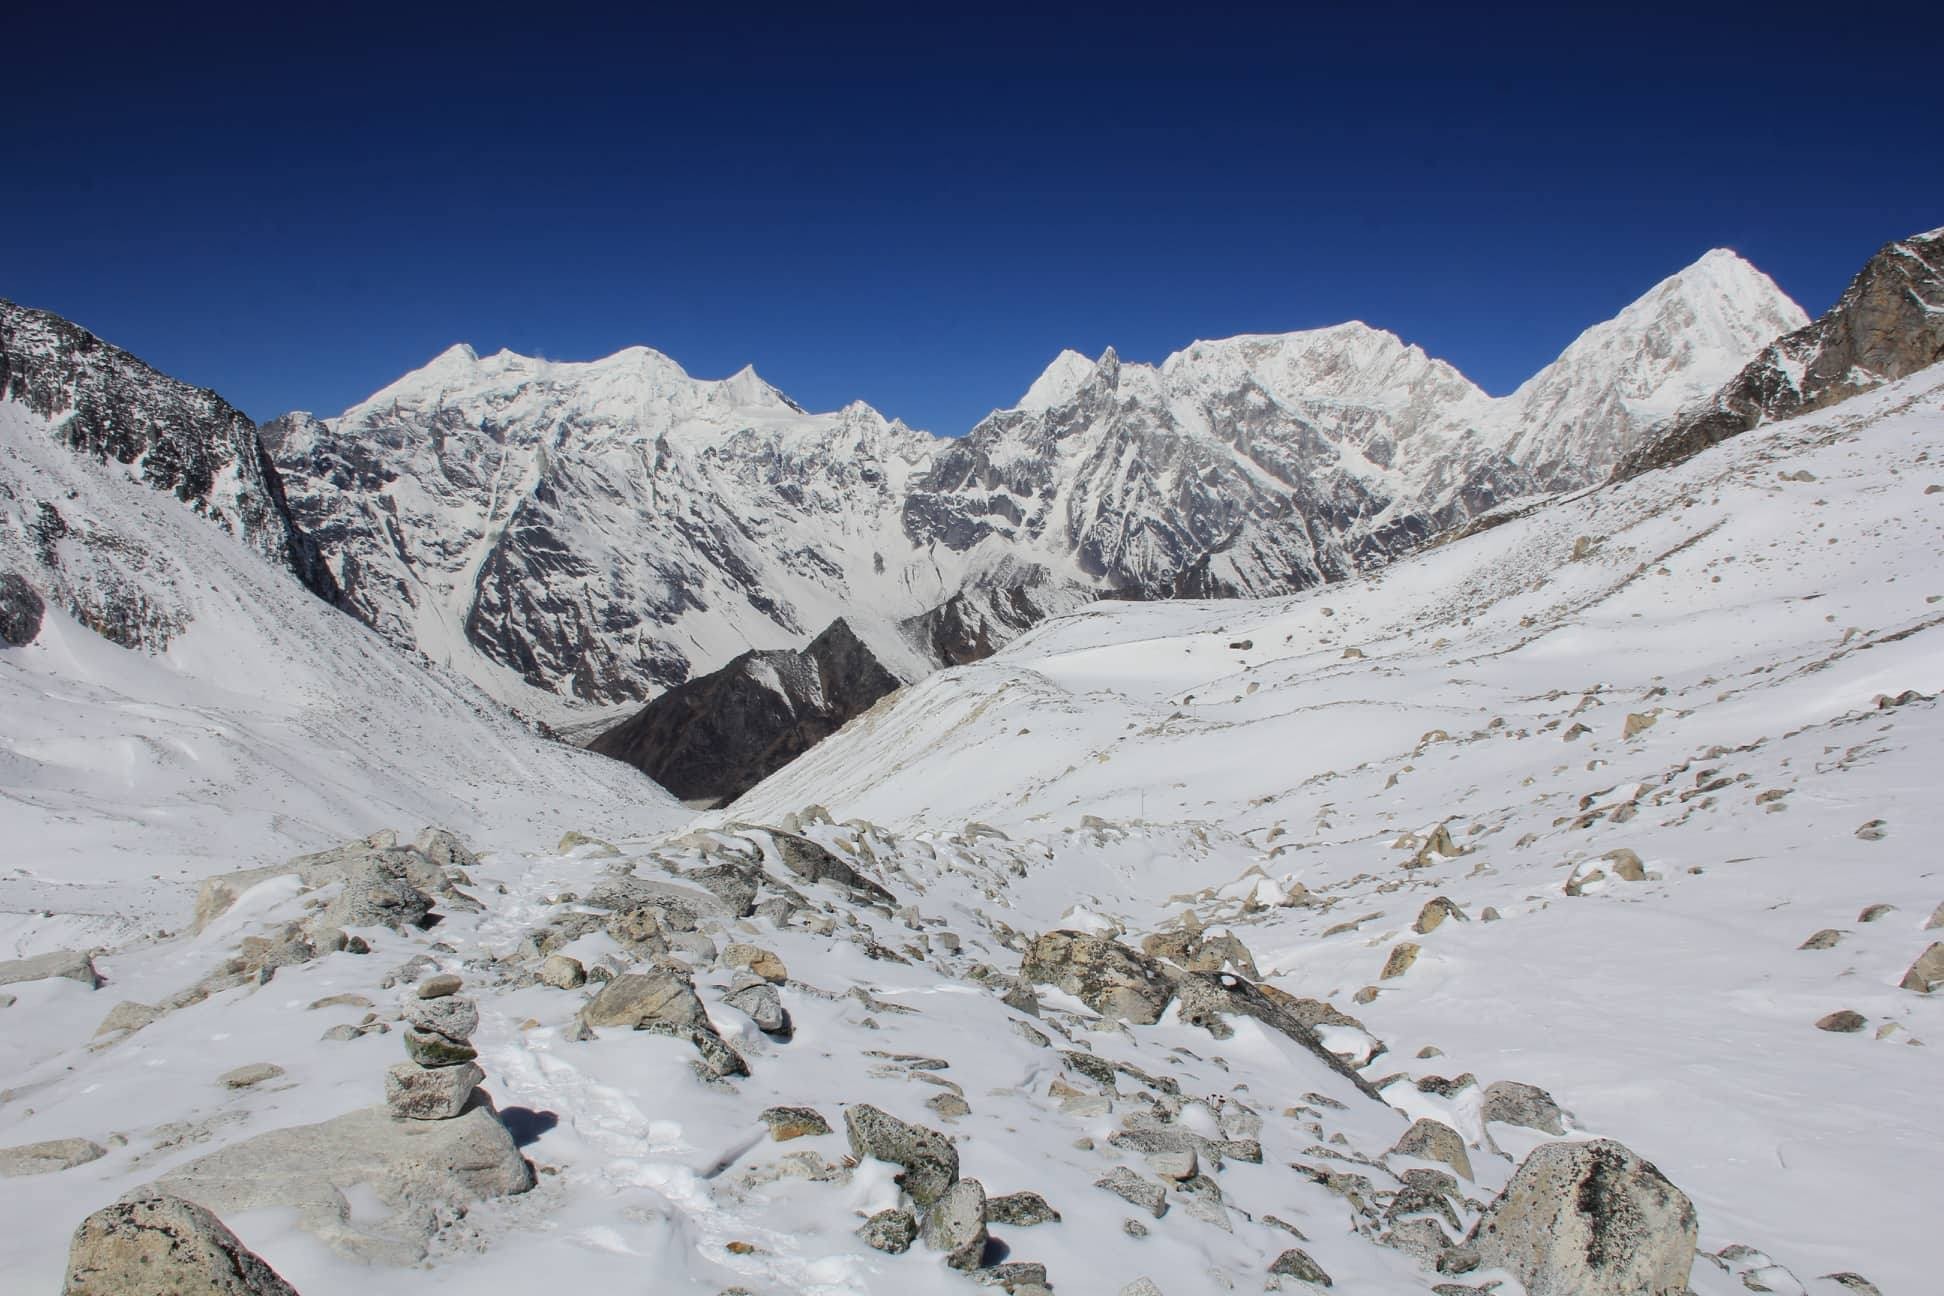 Manaslu Trek without the guide